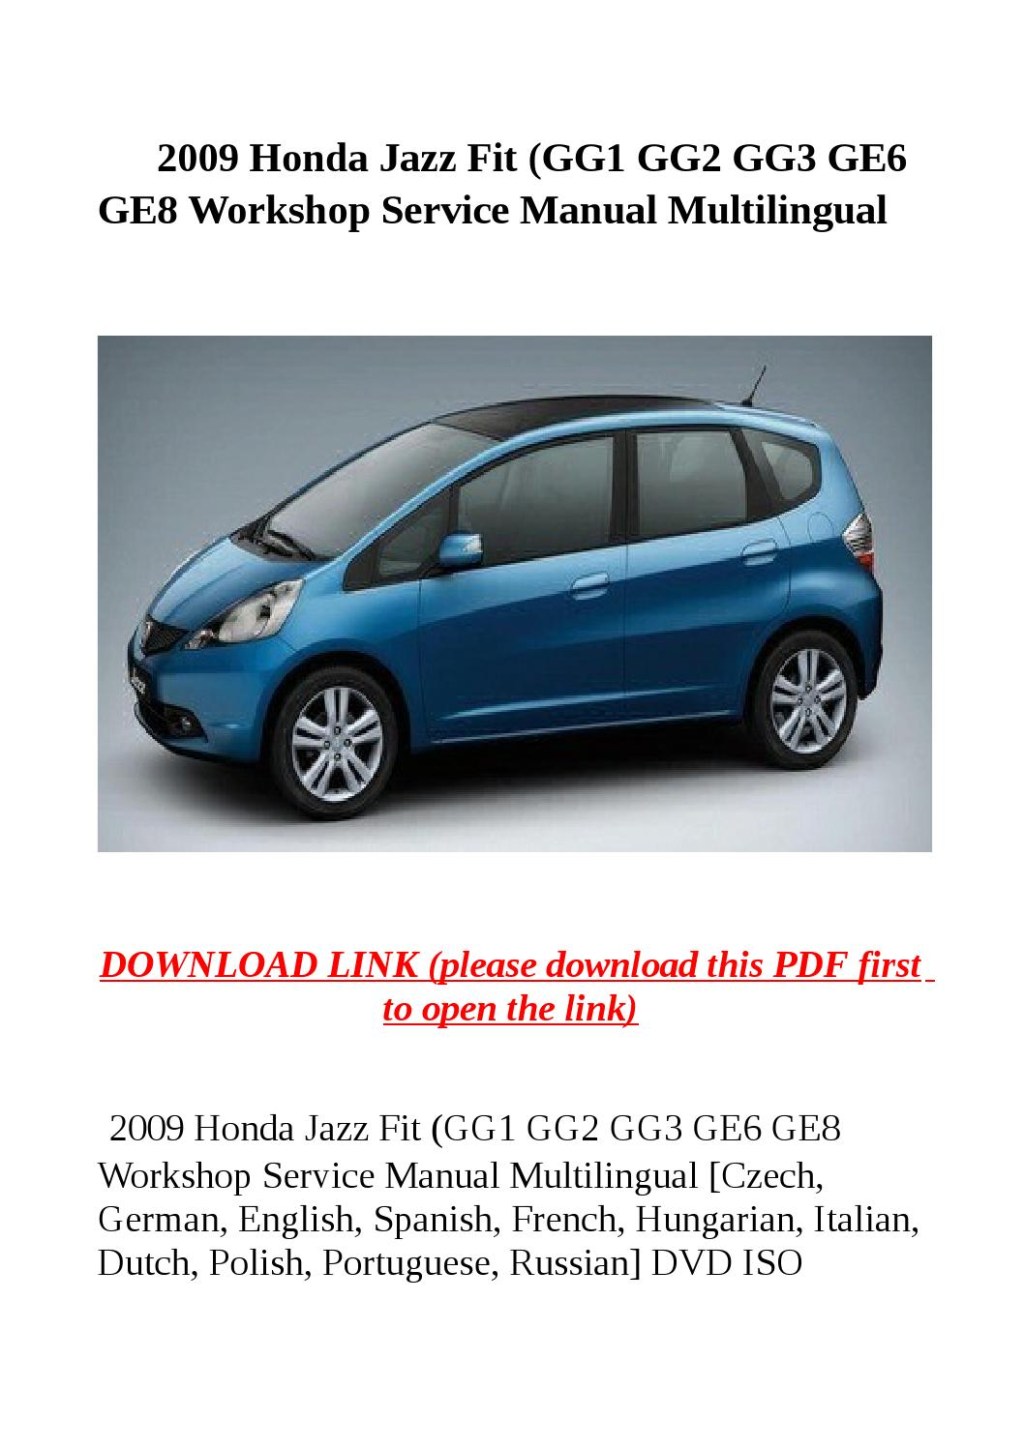 Picture of: honda jazz fit (gg gg gg ge ge workshop service manual